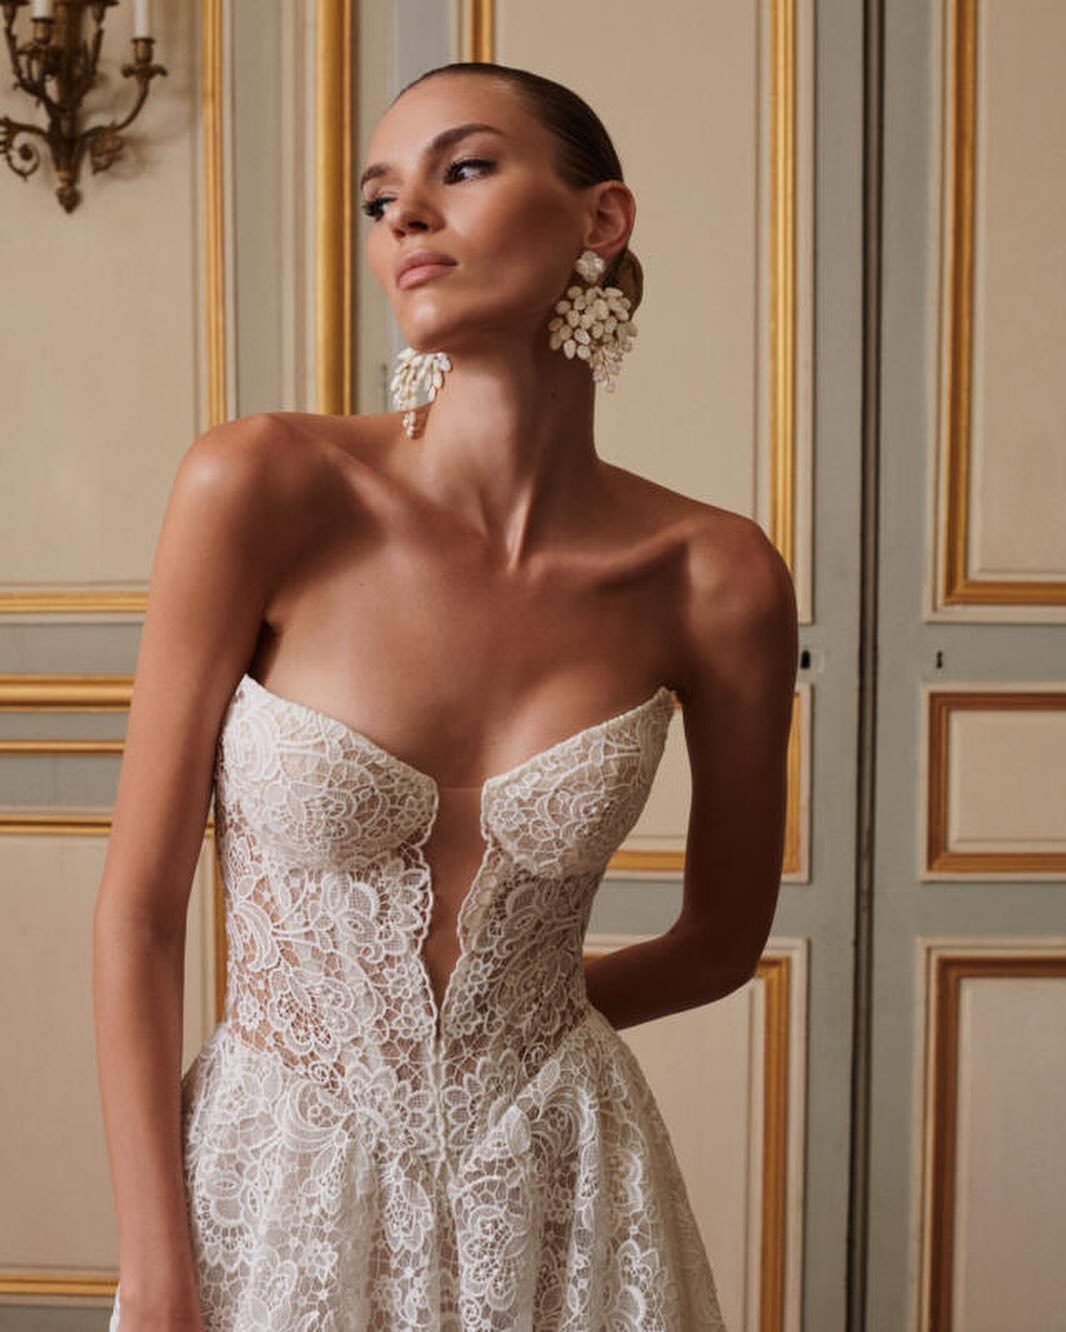 The L&rsquo;&Eacute;toile collection Trunk Show of @galialahav begins this Thursday! 🎉🎉 Basque waists, extravagant floral touches, low backs, pearl details, perfect soft sparkles&hellip; There&rsquo;s something for every bride! 👏

Limited appointm